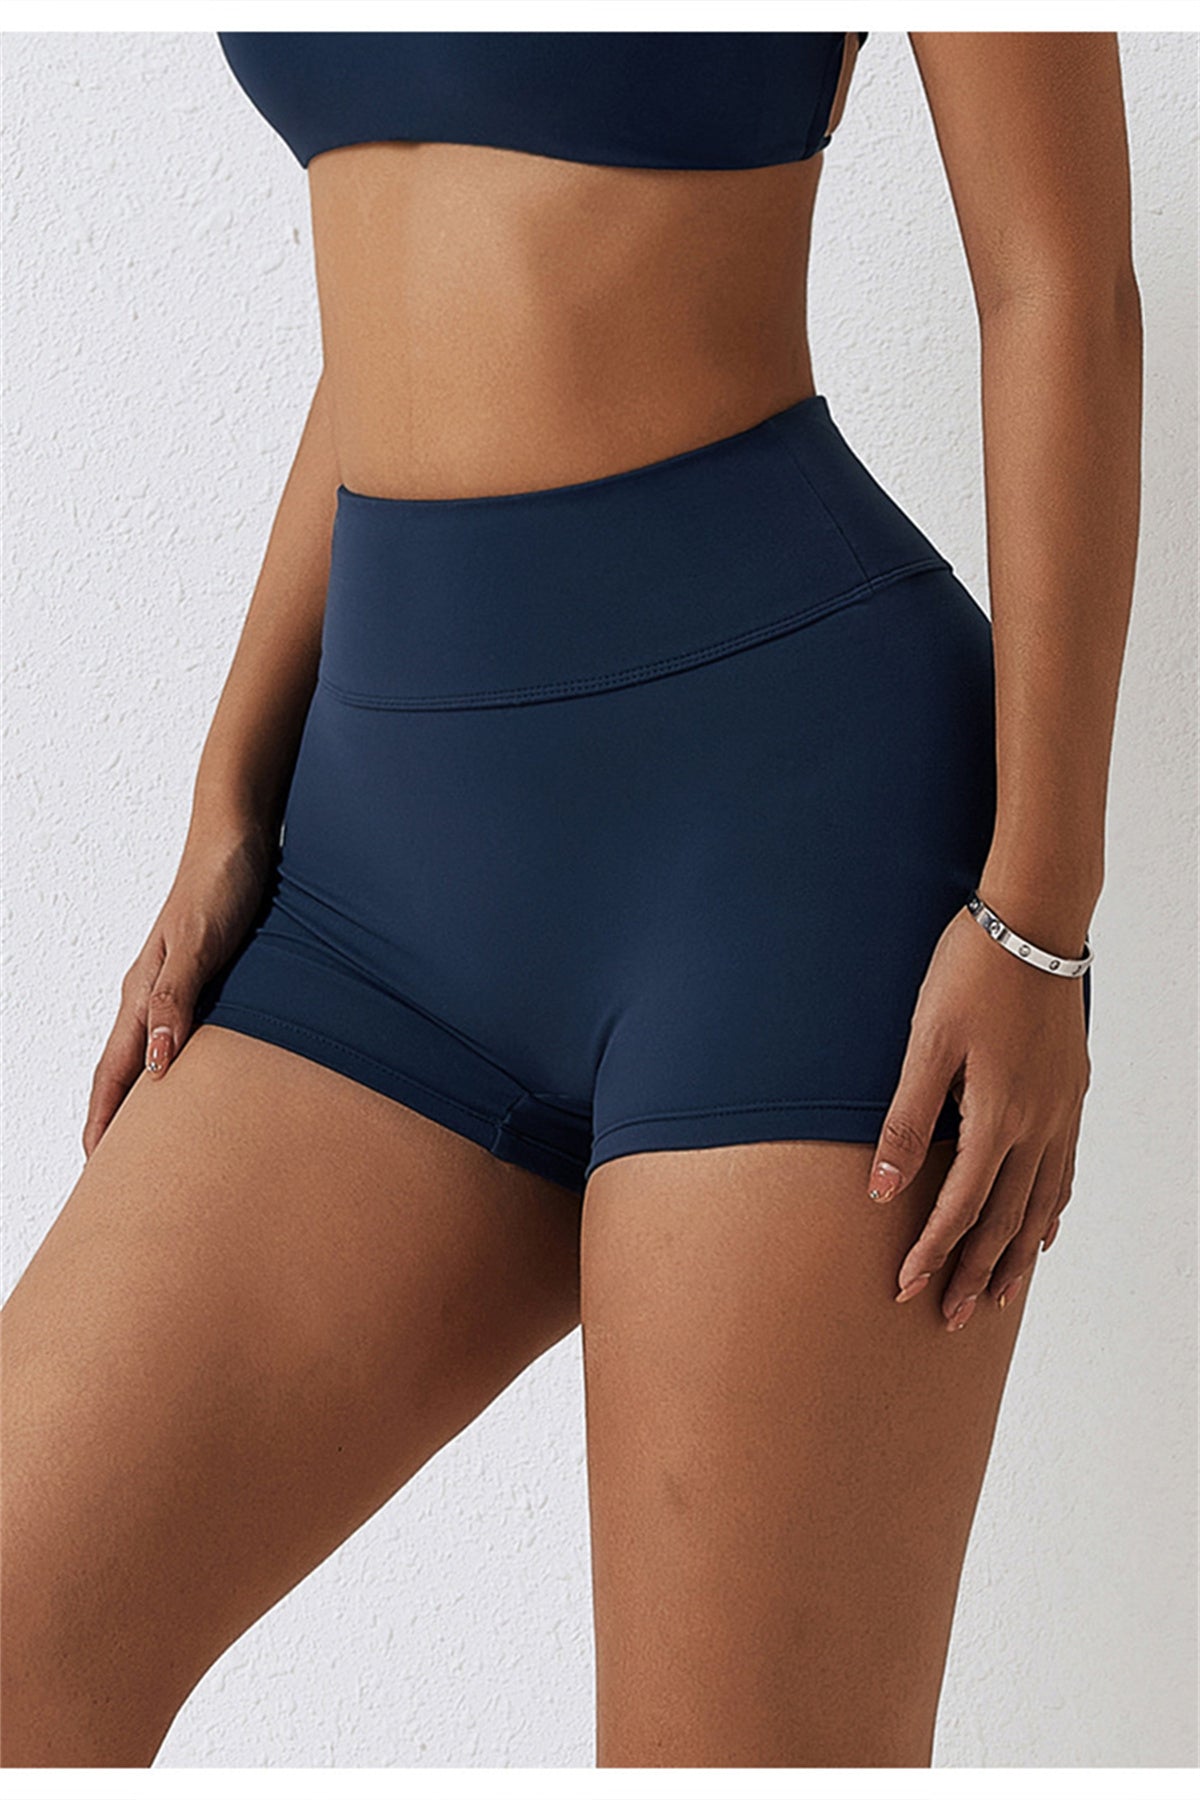 High Waisted Ruched Yoga Shorts